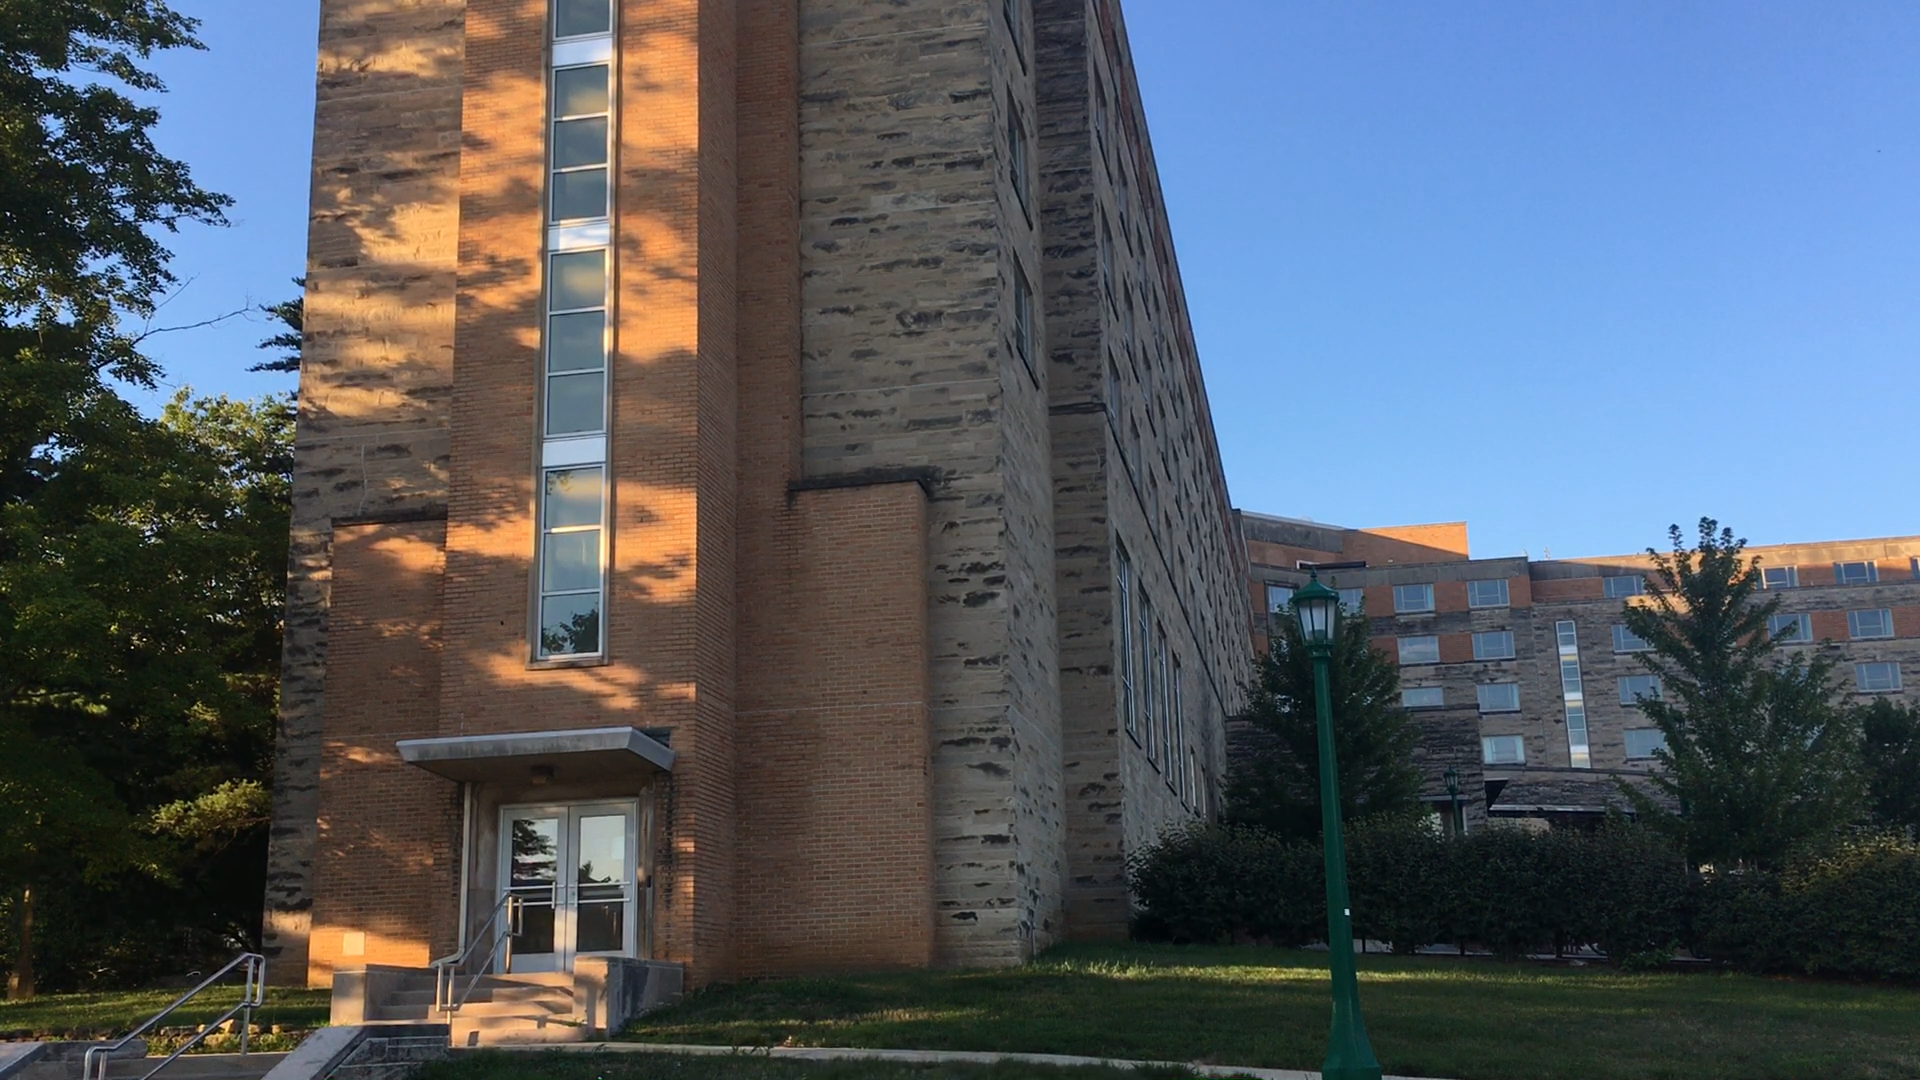 Two separate burglaries reported at Read Hall over winter break